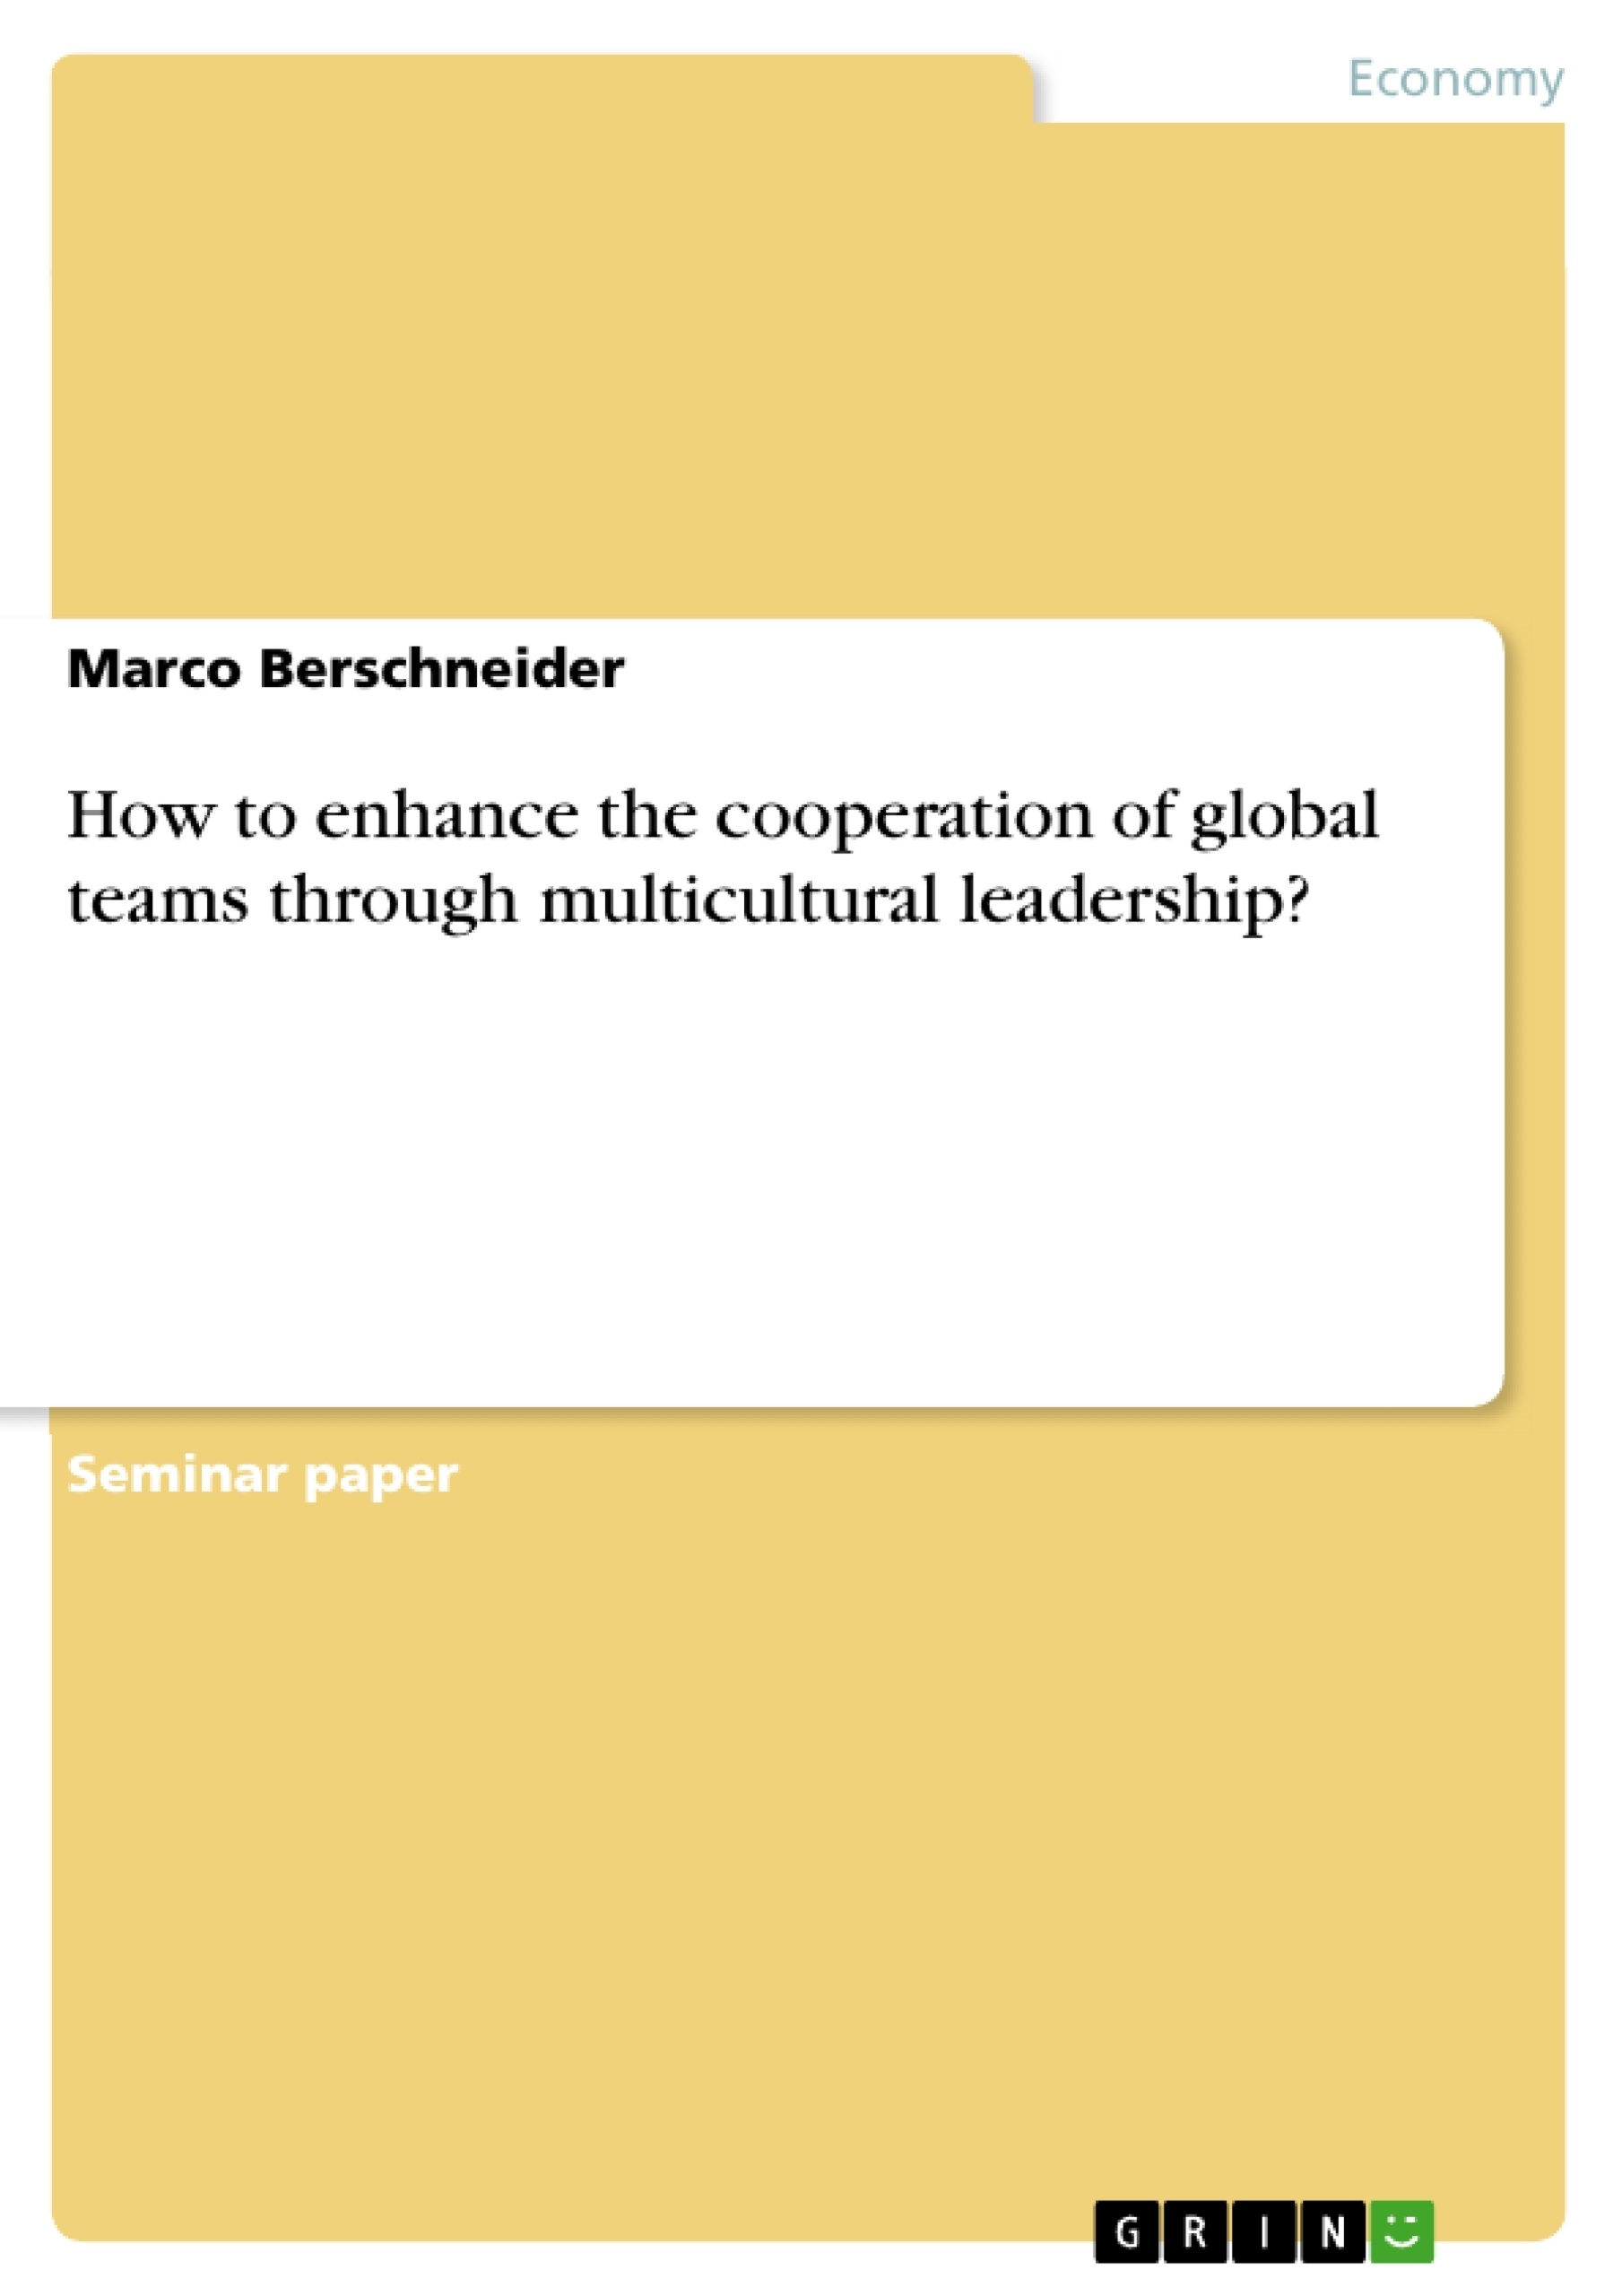 Title: How to enhance the cooperation of global teams through multicultural leadership?